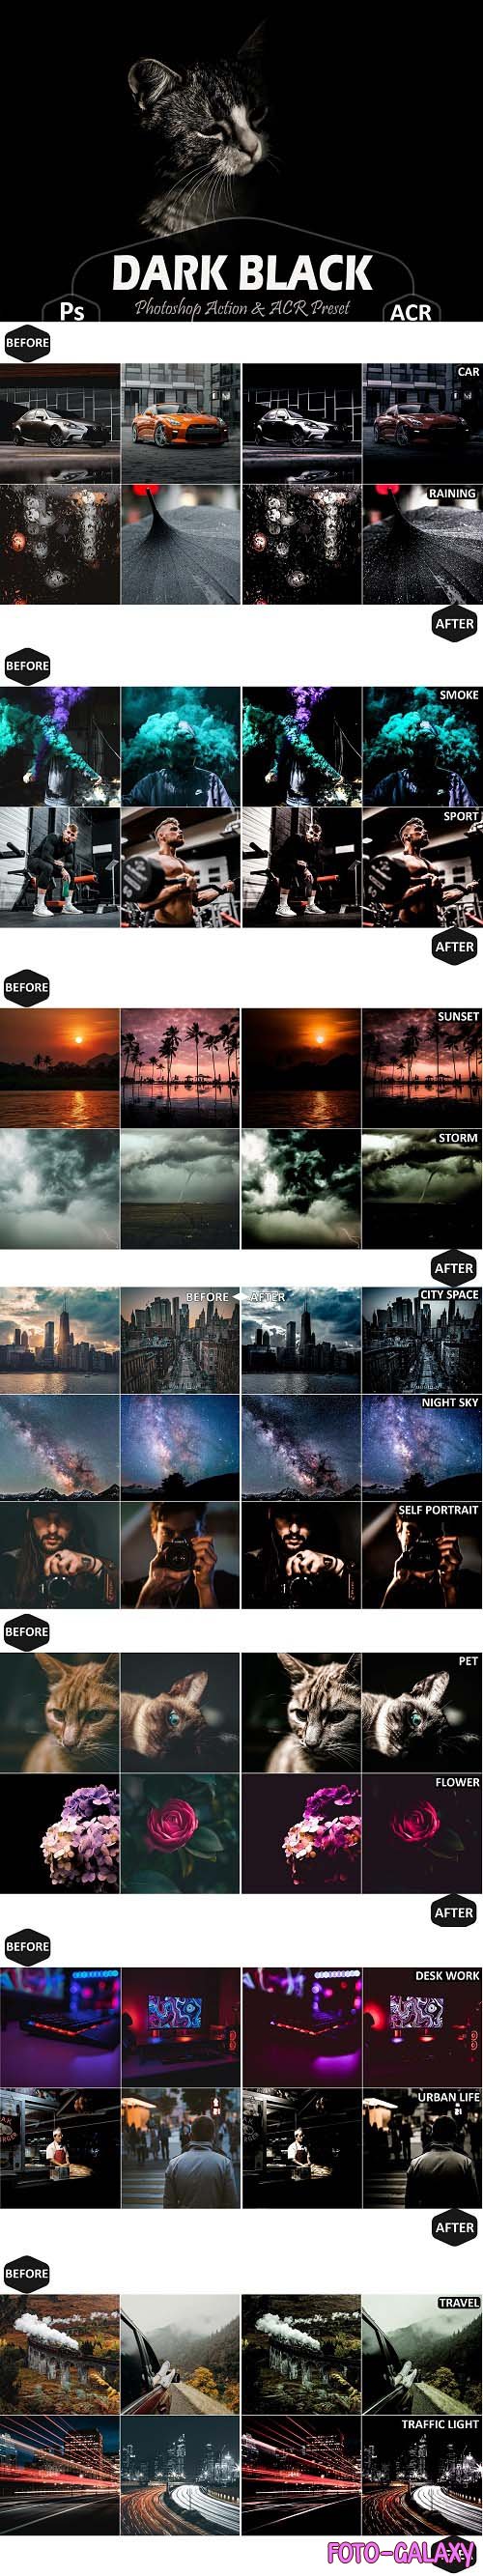 36 Dark Black Photoshop Actions And ACR Presets - 1553543